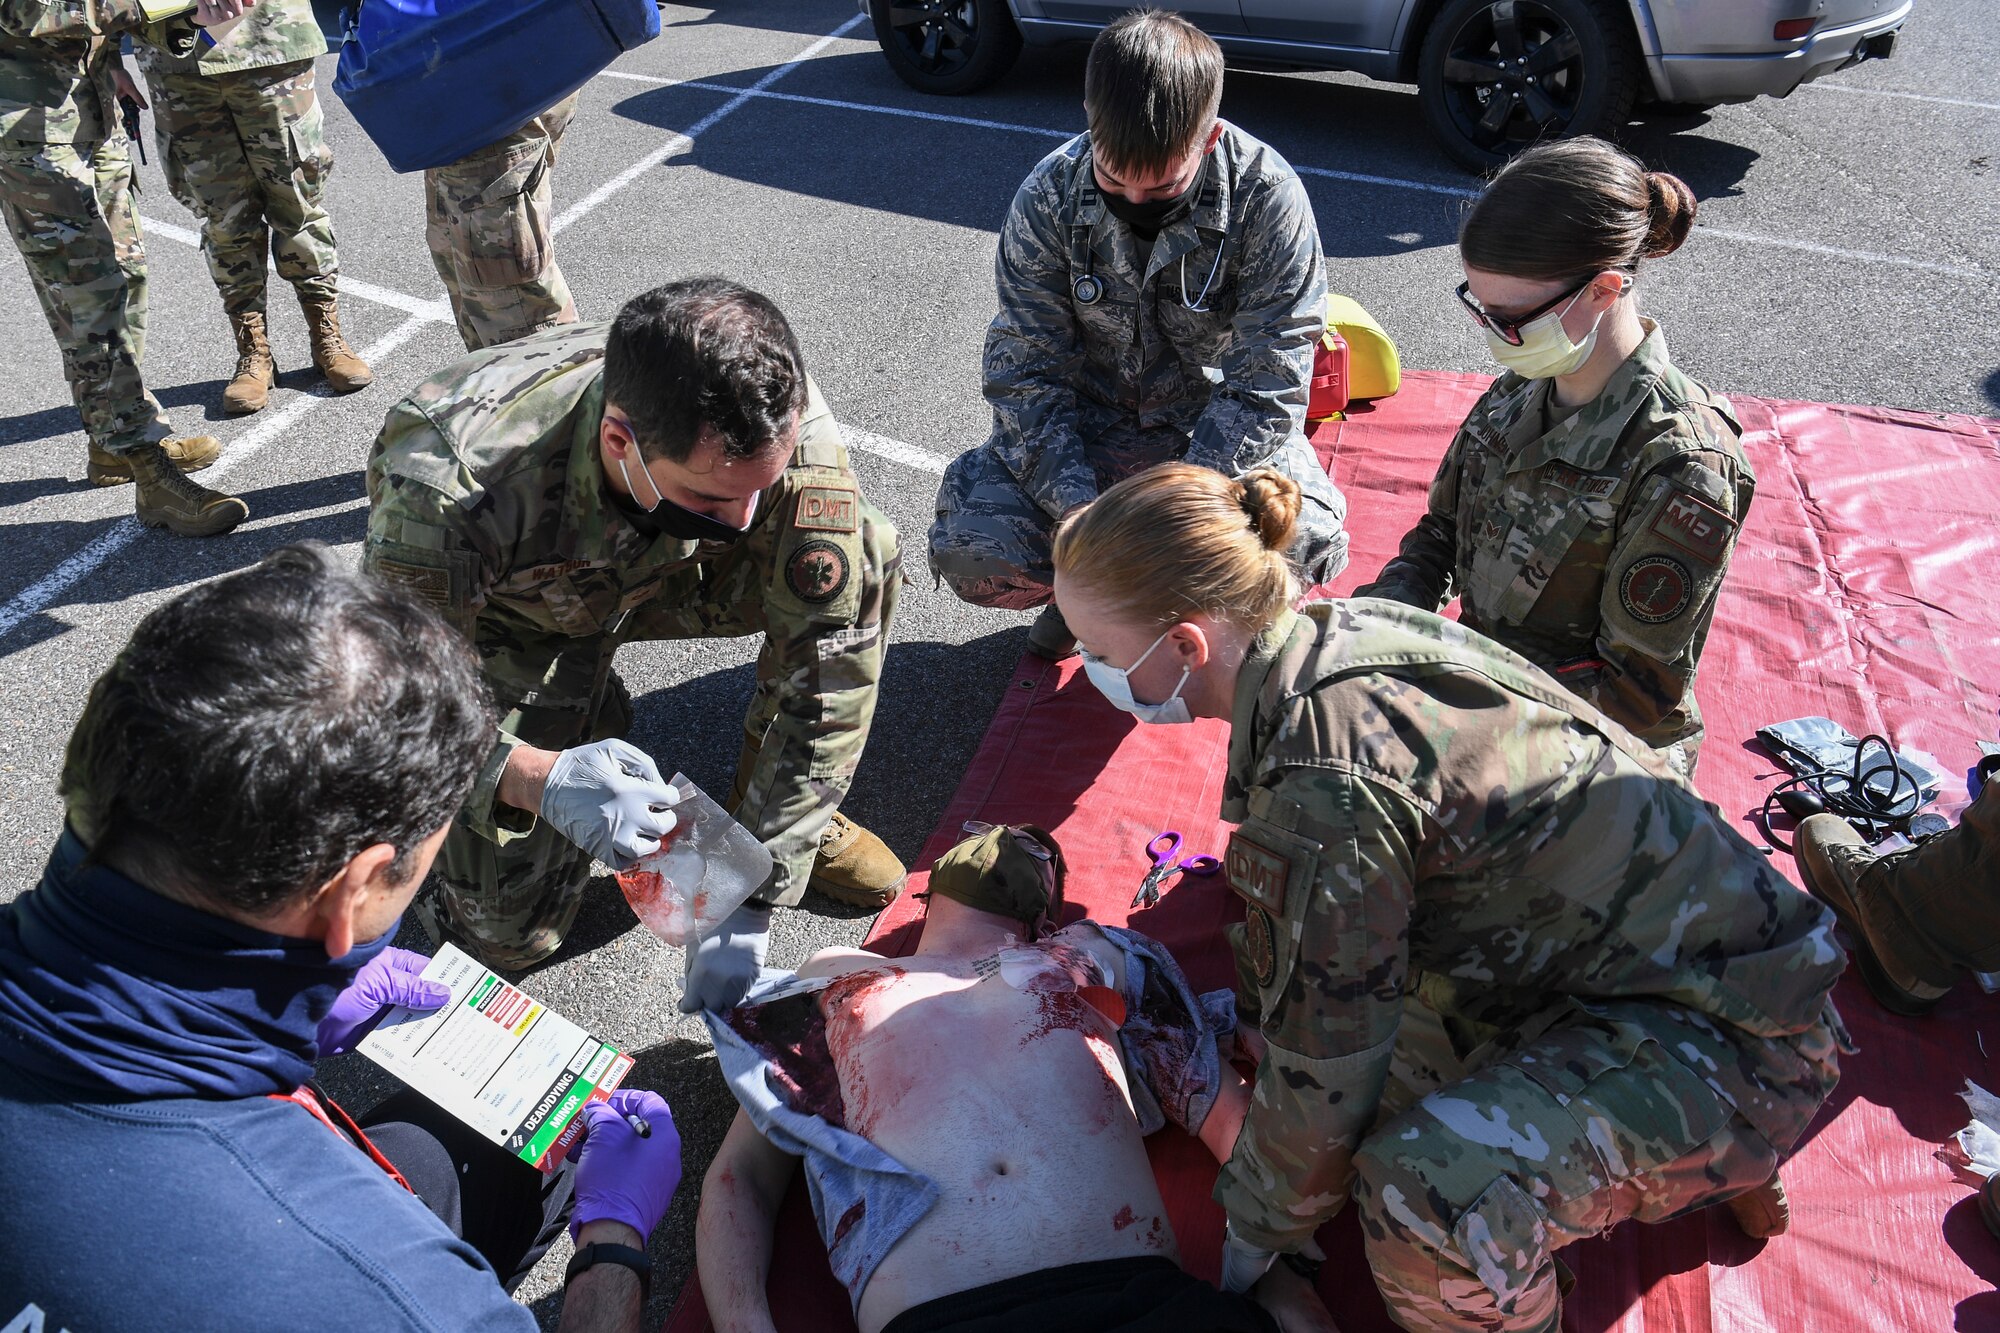 Medical officials perform triage for casualties.